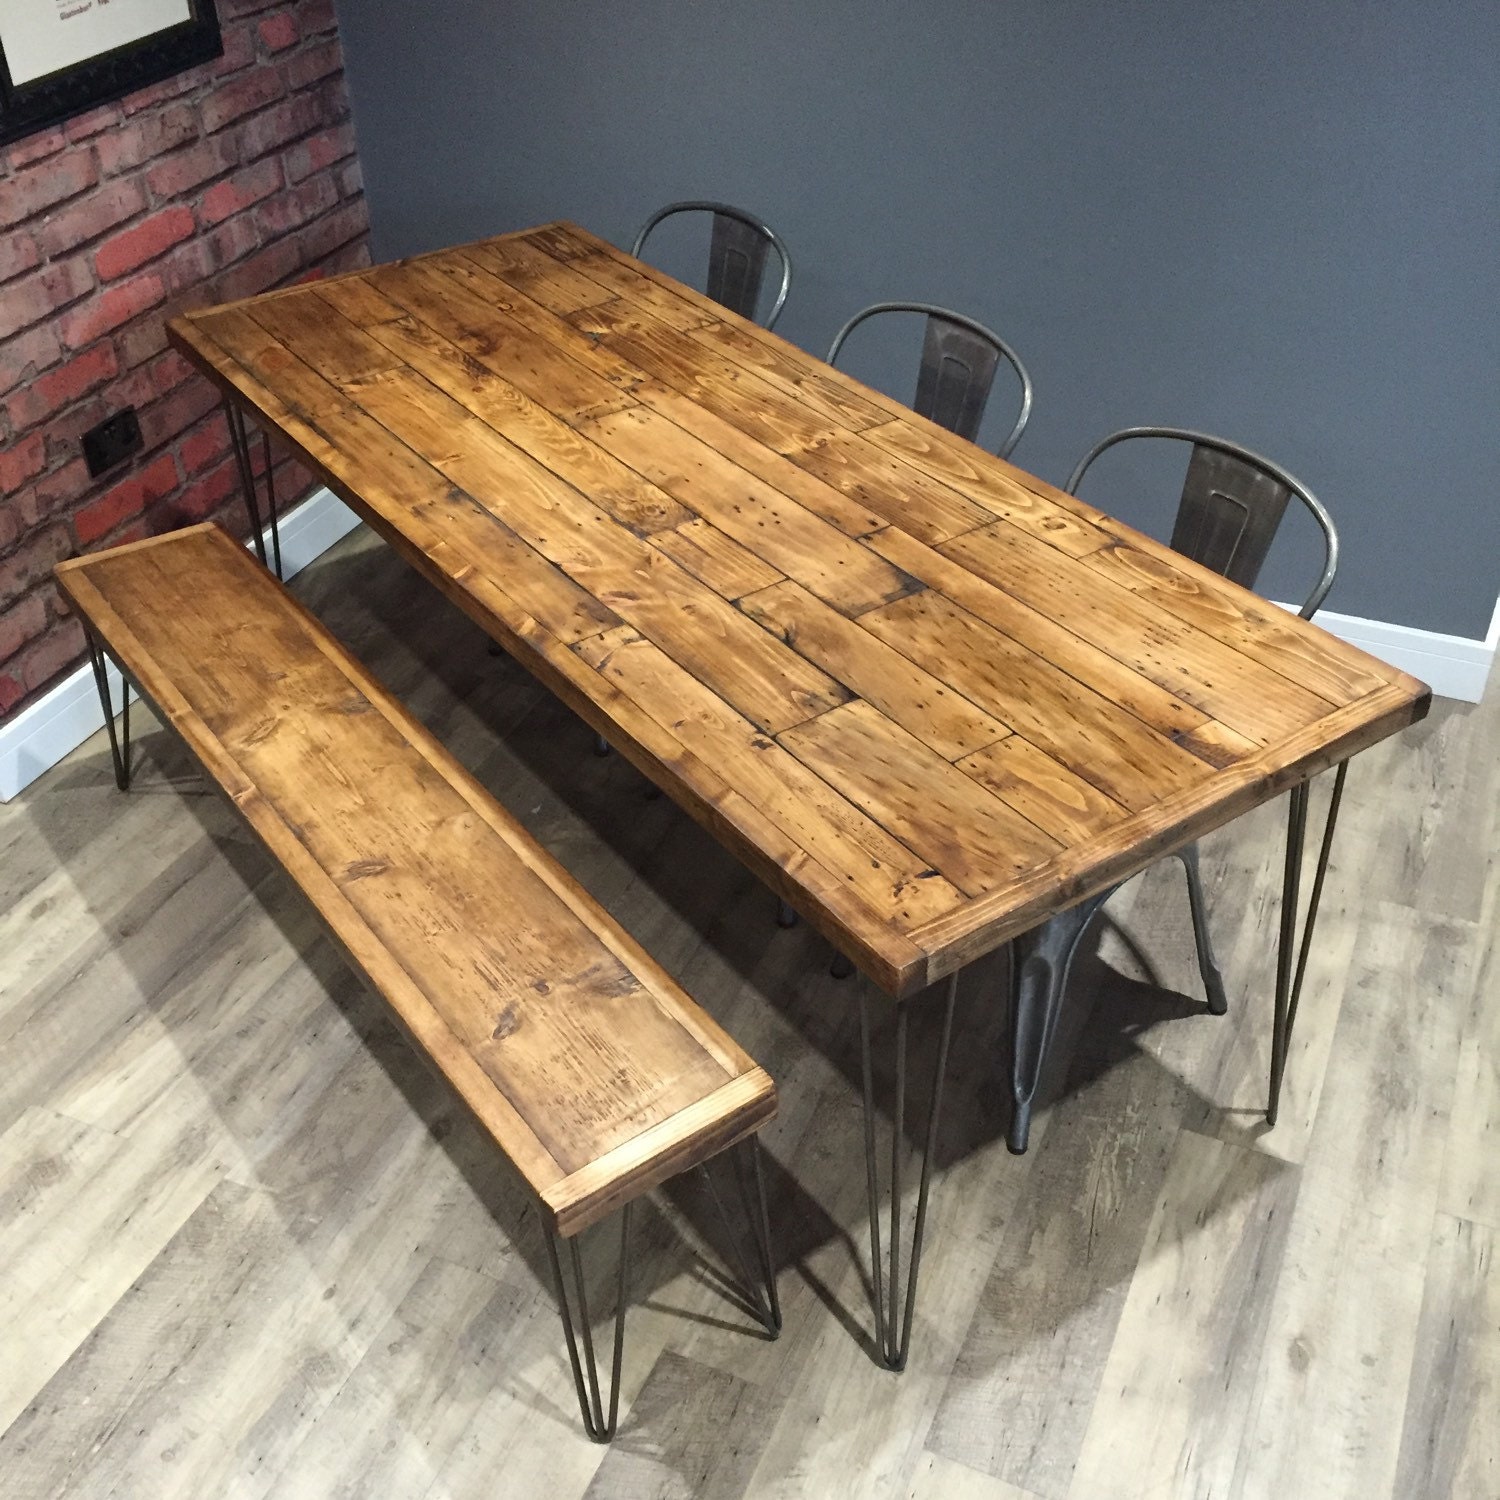 Latest Reclaimed Wood Dining Room Furniture News Update